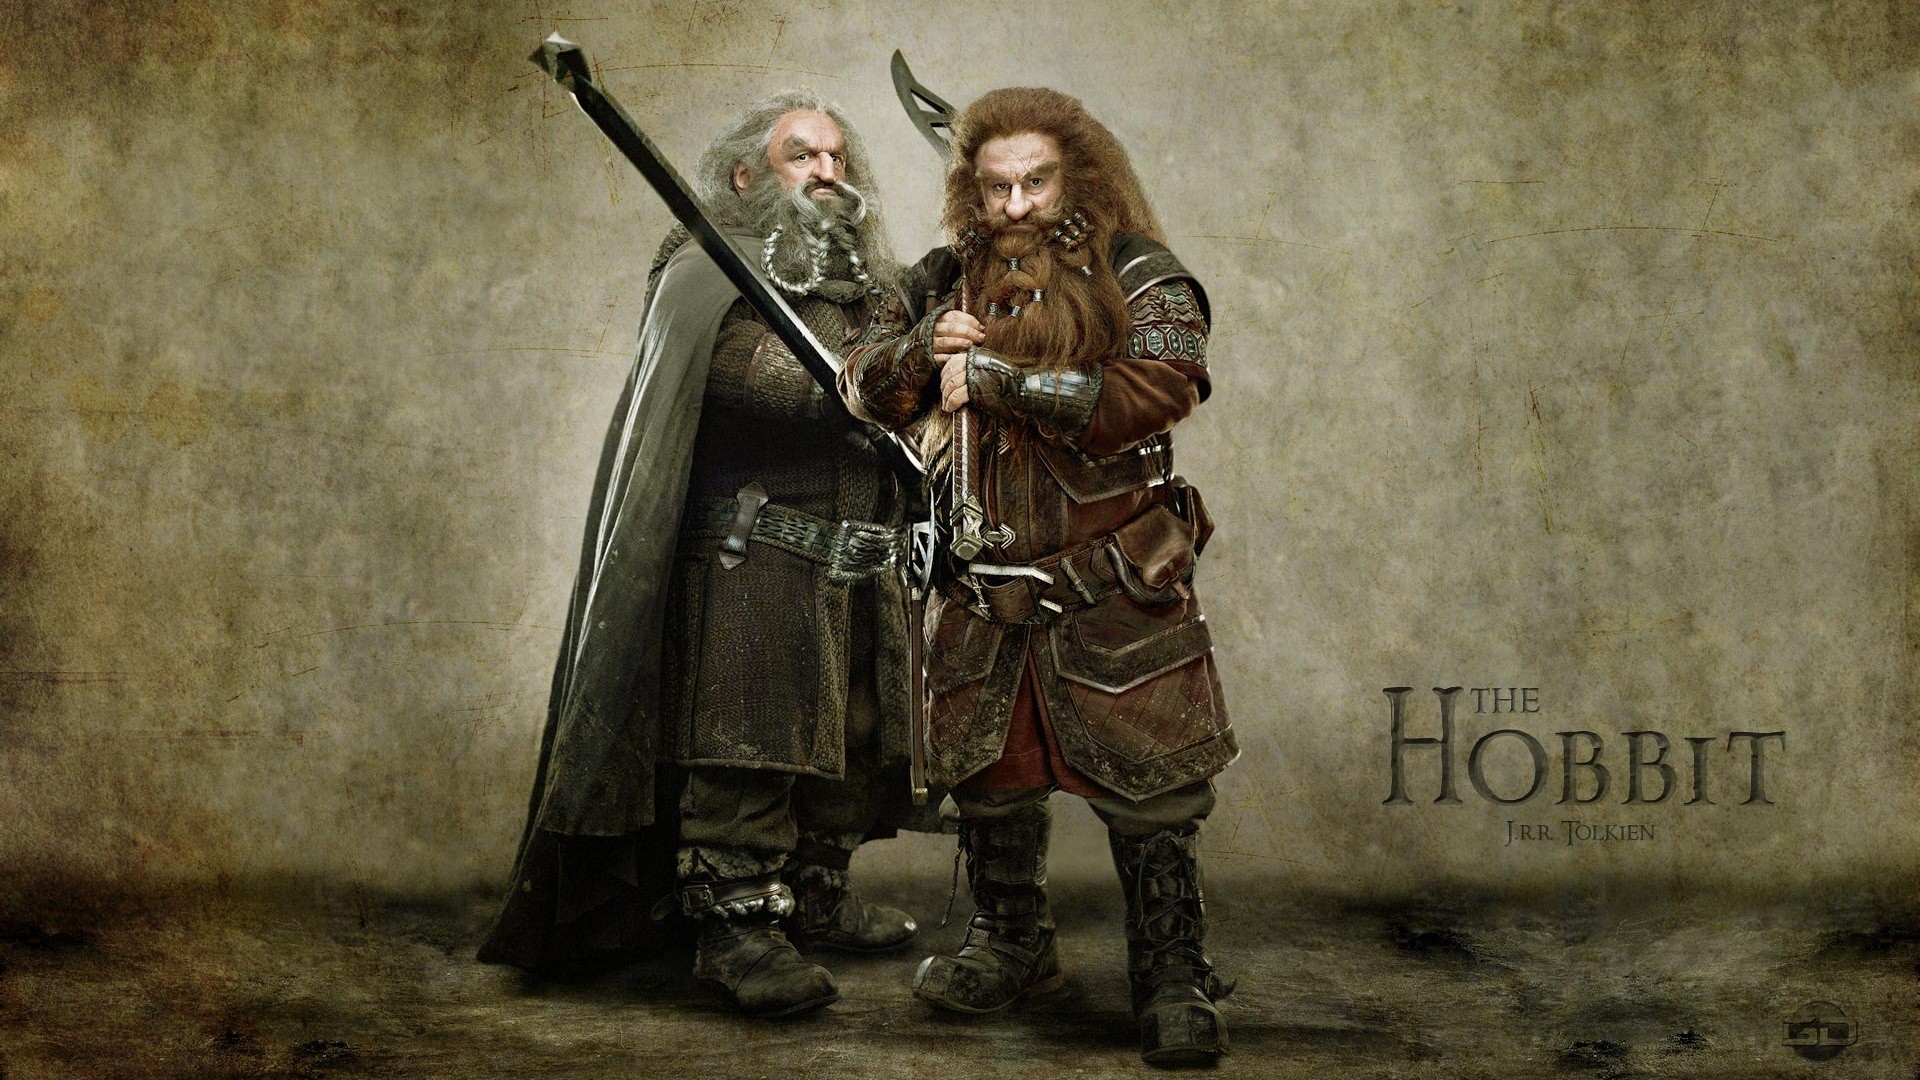 The Hobbit: An Unexpected Journey HD wallpapers #6 – 1920×1080.